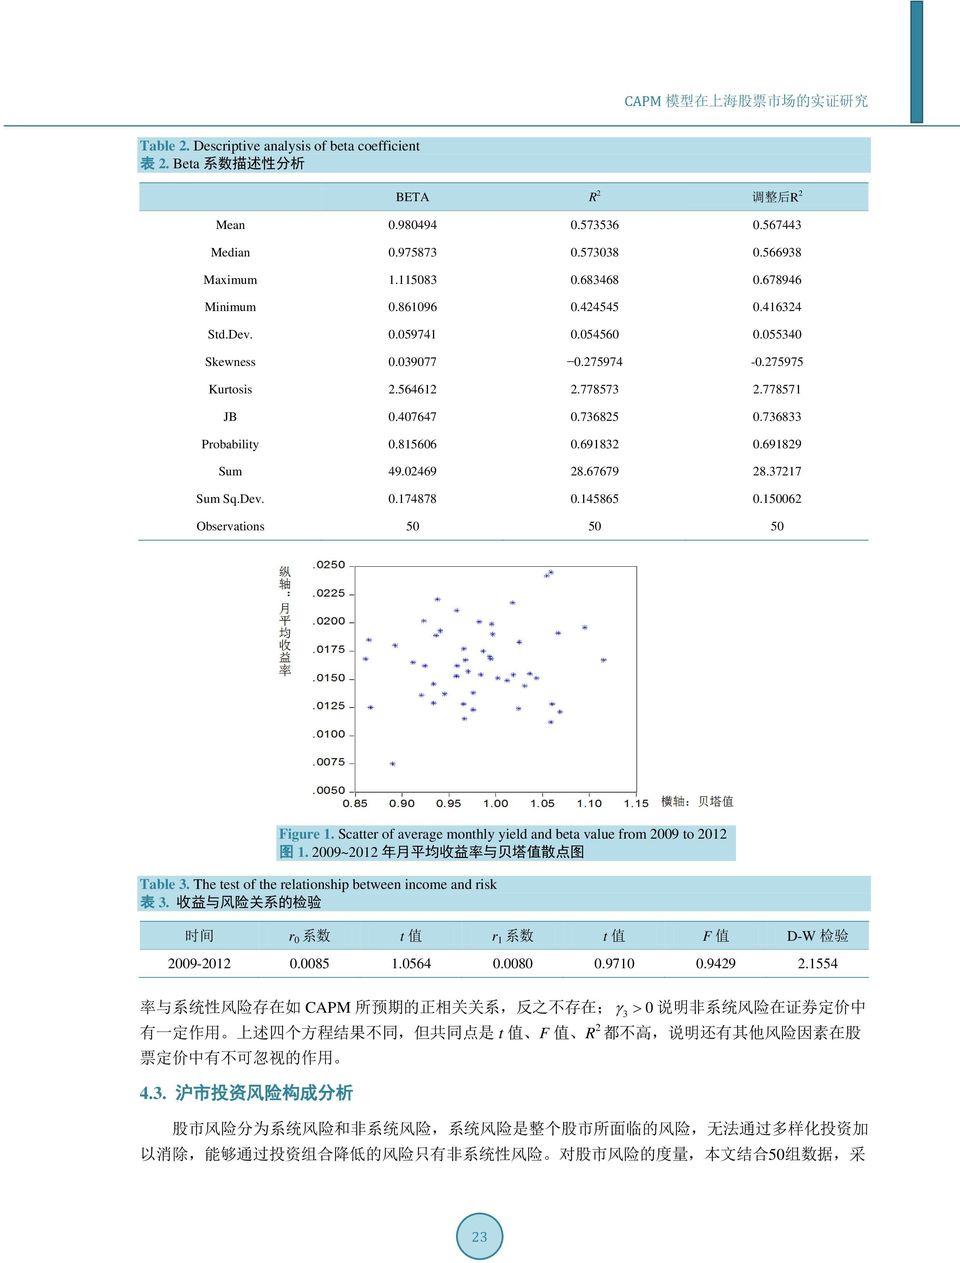 3717 Sum Sq.Dev. 0.174878 0.145865 0.15006 Observatons 50 50 50 Fgure 1. Scatter of average monthly yeld and beta value from 009 to 01 图 1. 009~01 年 月 平 均 收 益 率 与 贝 塔 值 散 点 图 Table 3.